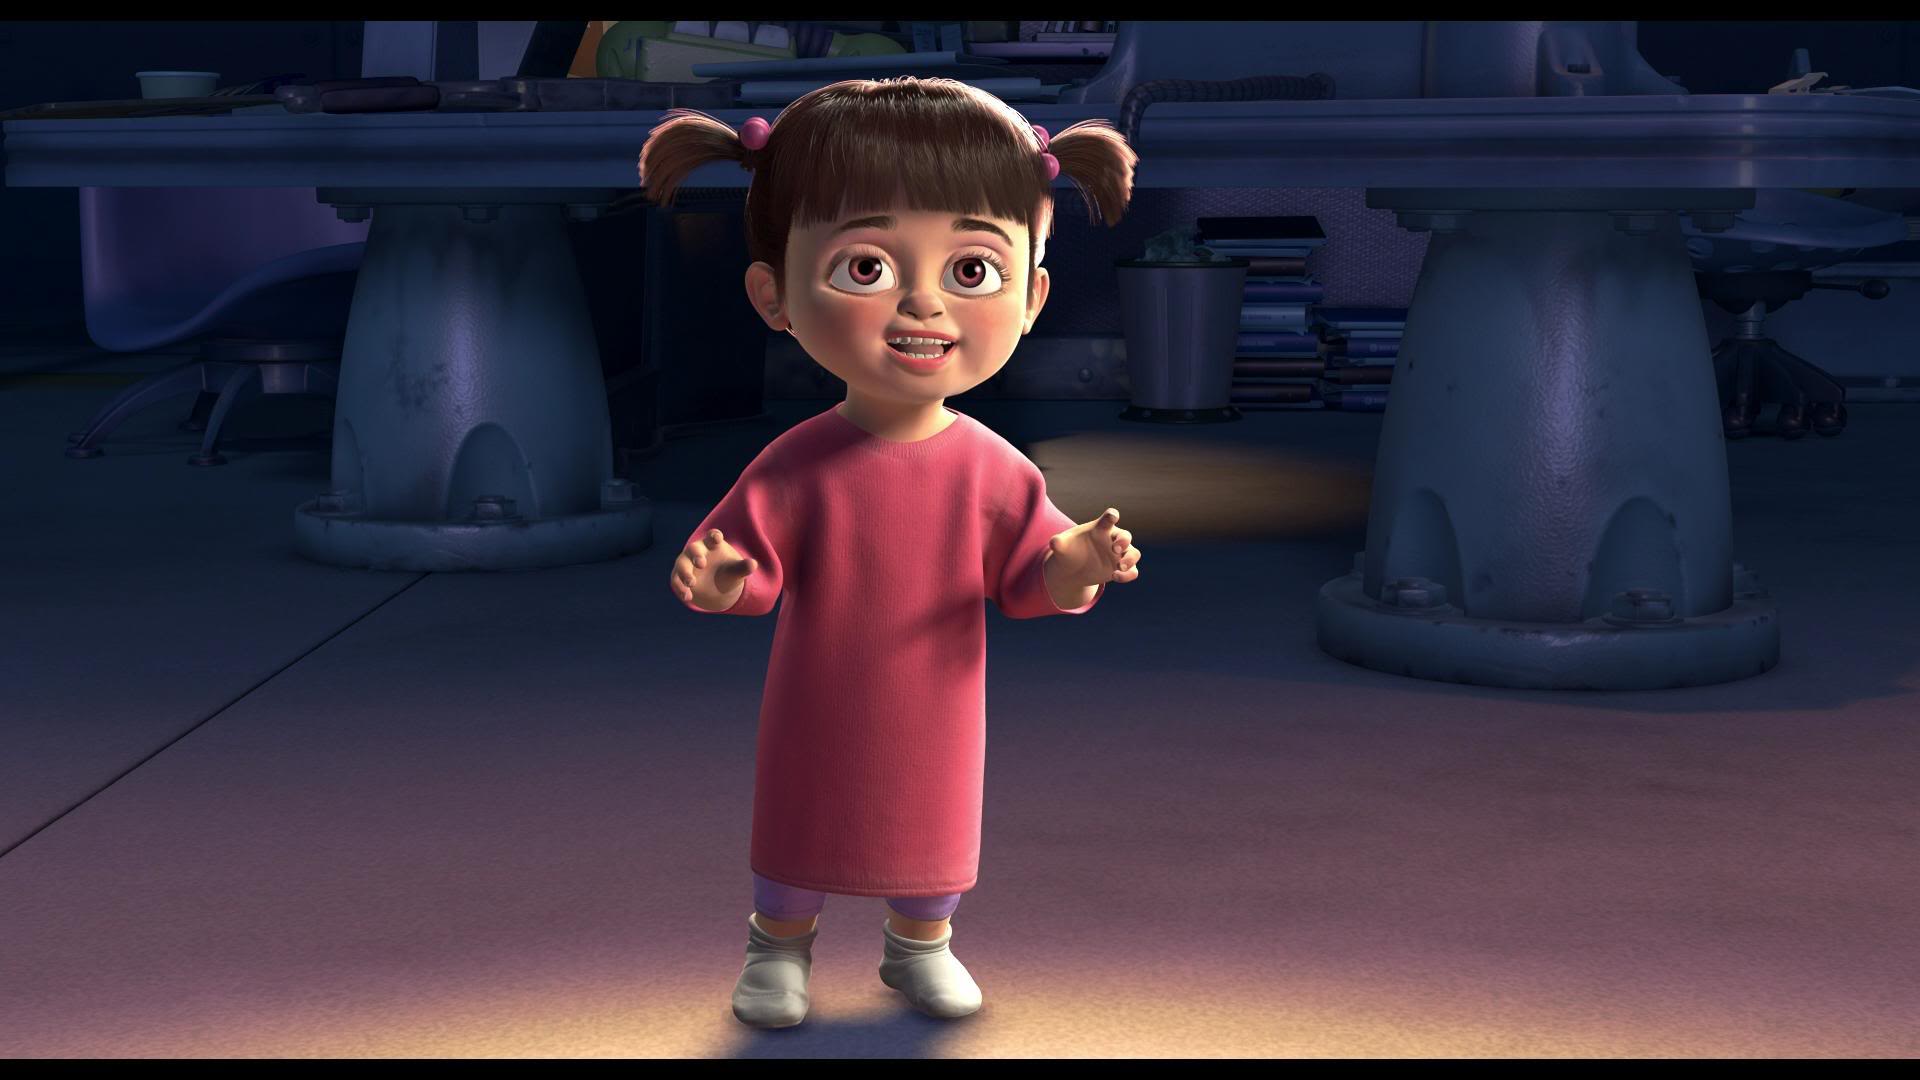 Is a movie about Boo from Monsters, Inc. actually happening